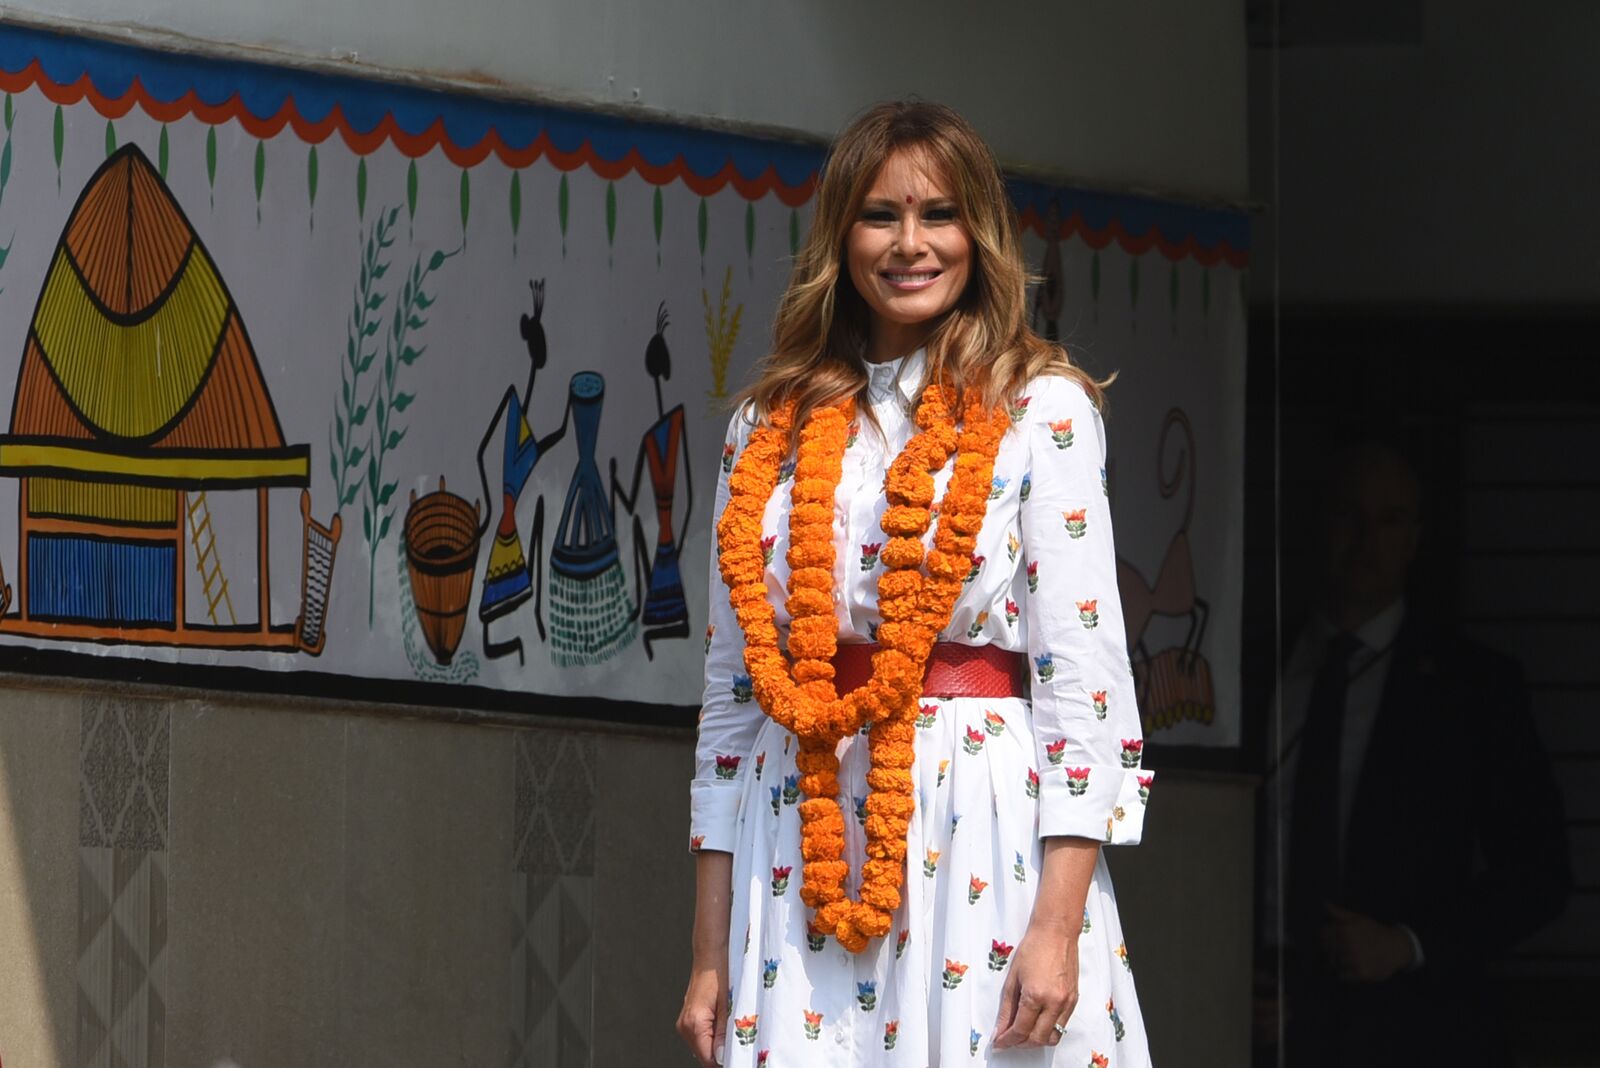 Melania Trump at the Sarvodaya Co-Educational Senior Secondary School during a visit to a Delhi Government School on February 25, 2020, in New Delhi, India | Photo: Sanchit Khanna/Hindustan Times/Getty Images